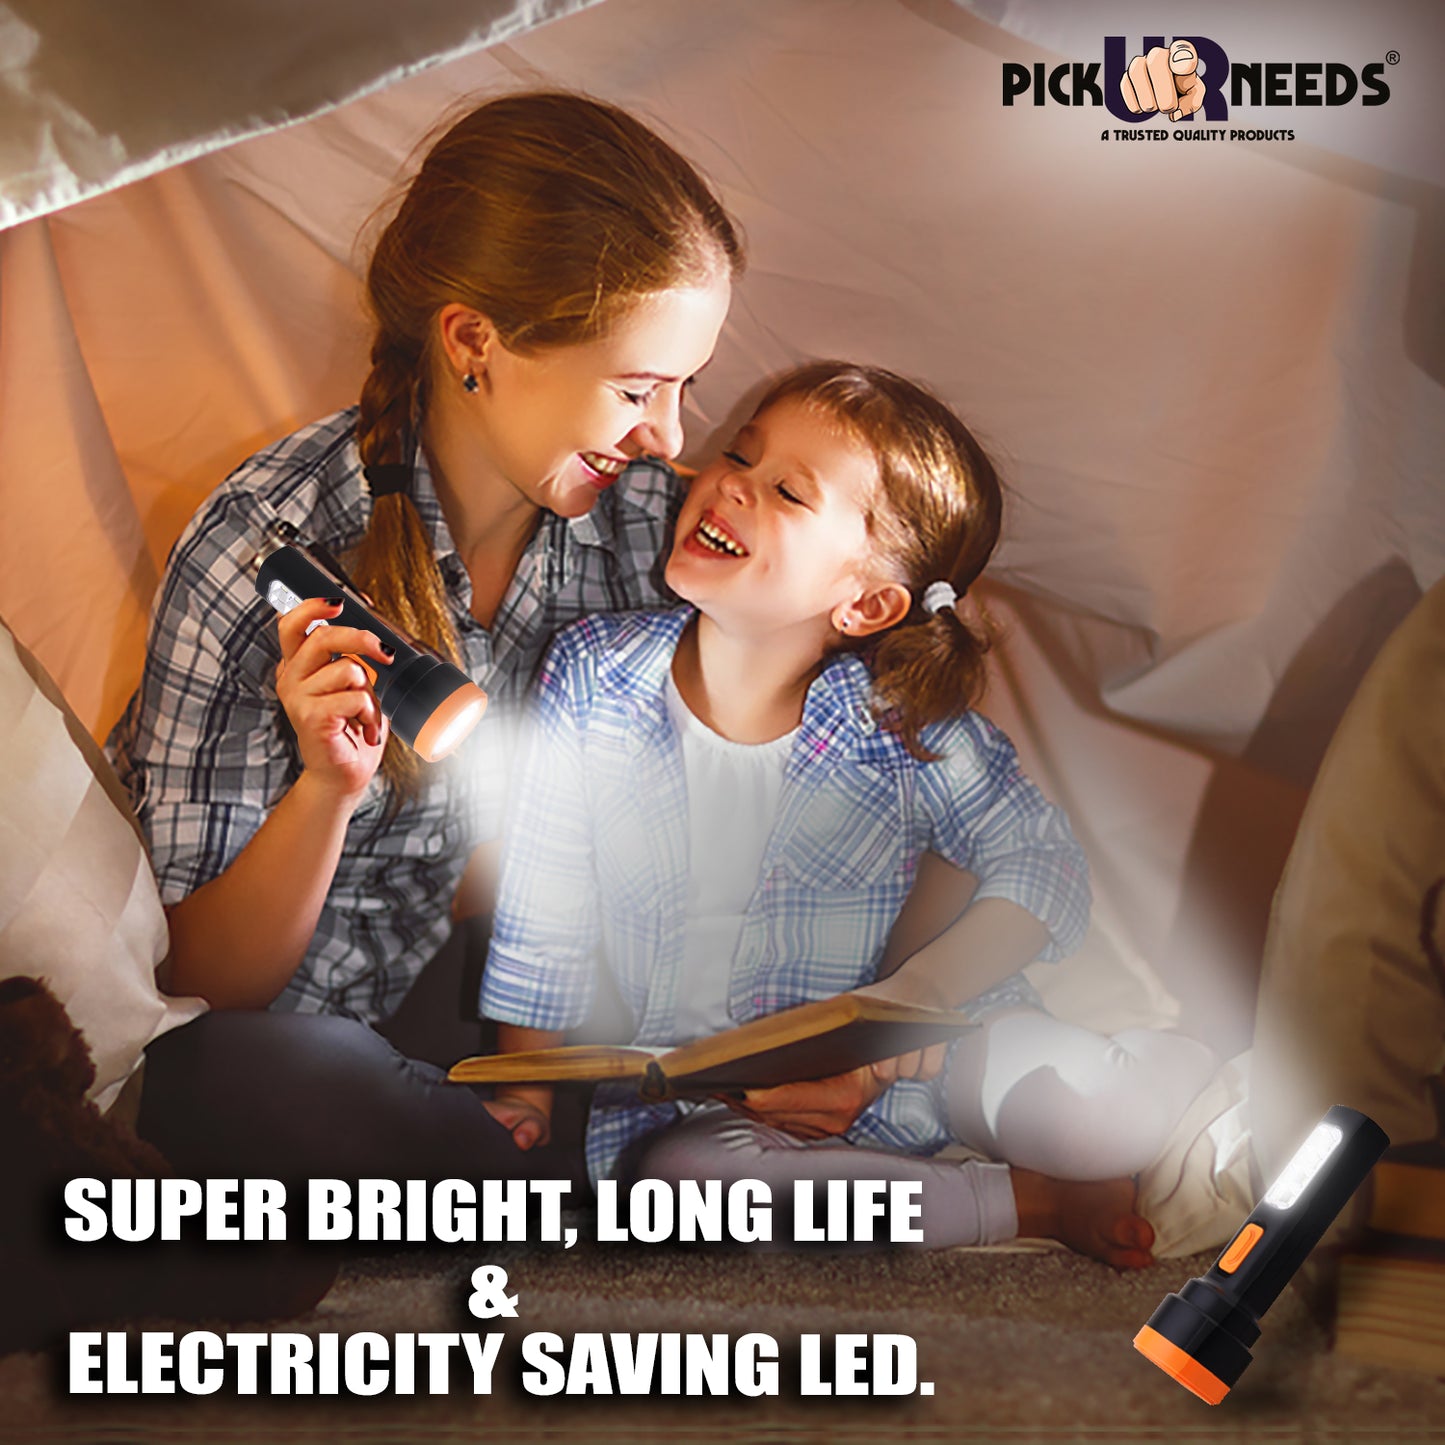 Pick Ur Needs Mini Torch 25W + 8 SMD for Emergency Floor Lantern Lamp Flash Light with Inbuilt Plug for Charge